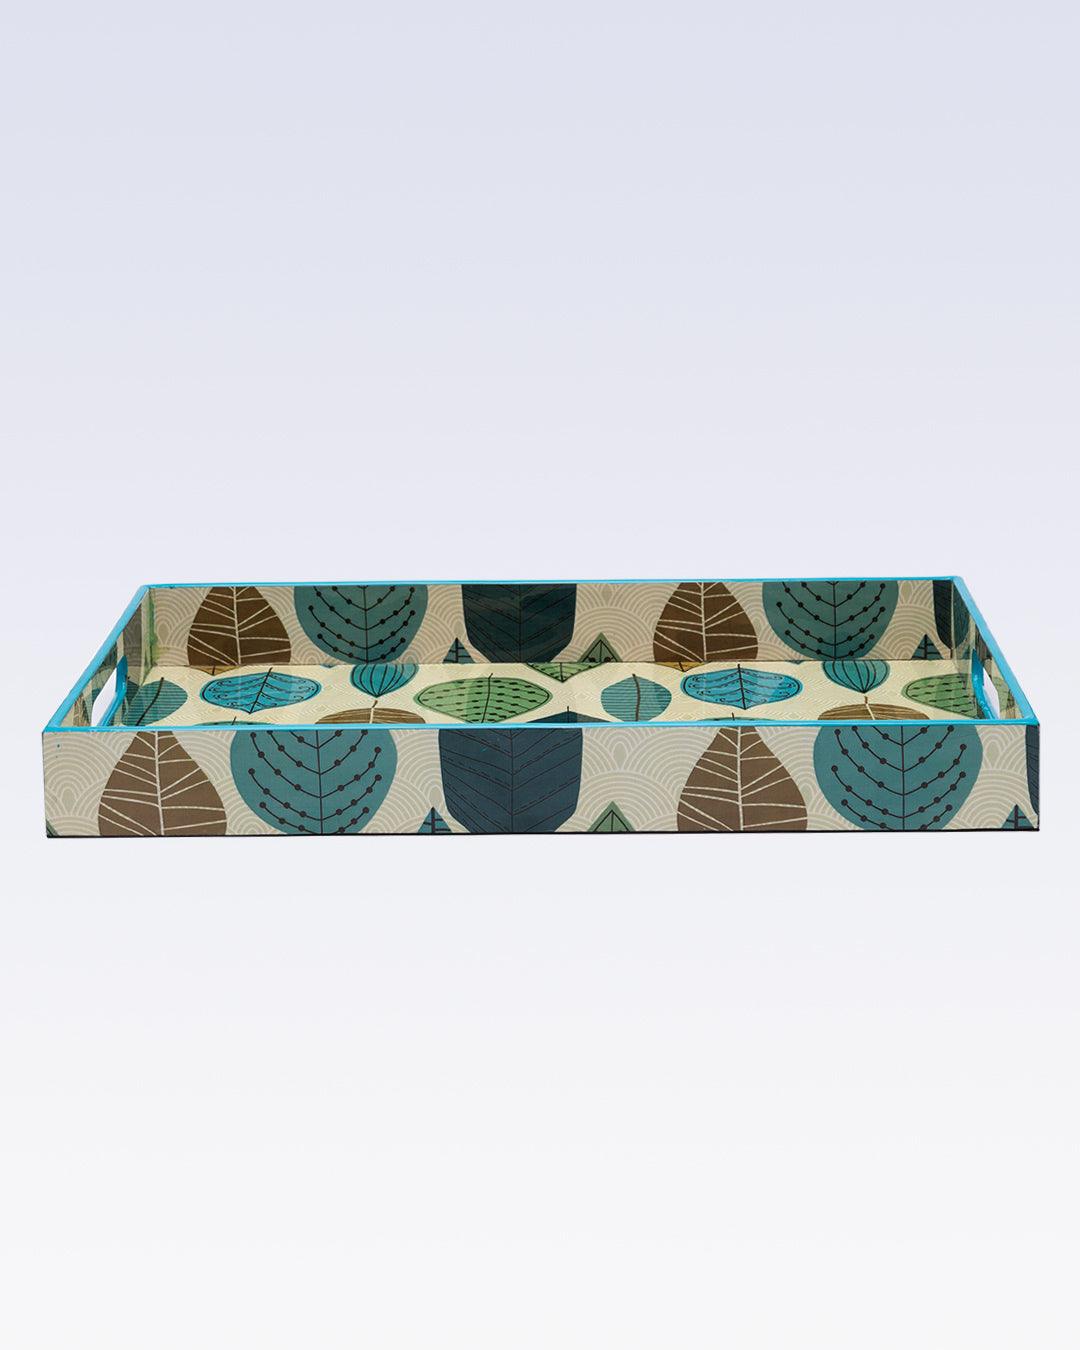 Market99 Decorative Serving Tray, Wooden Tray with Handles, Nature Inspired Design Tray, Home Décor, Standard, Rectangular, Multicolour, MDF - MARKET 99